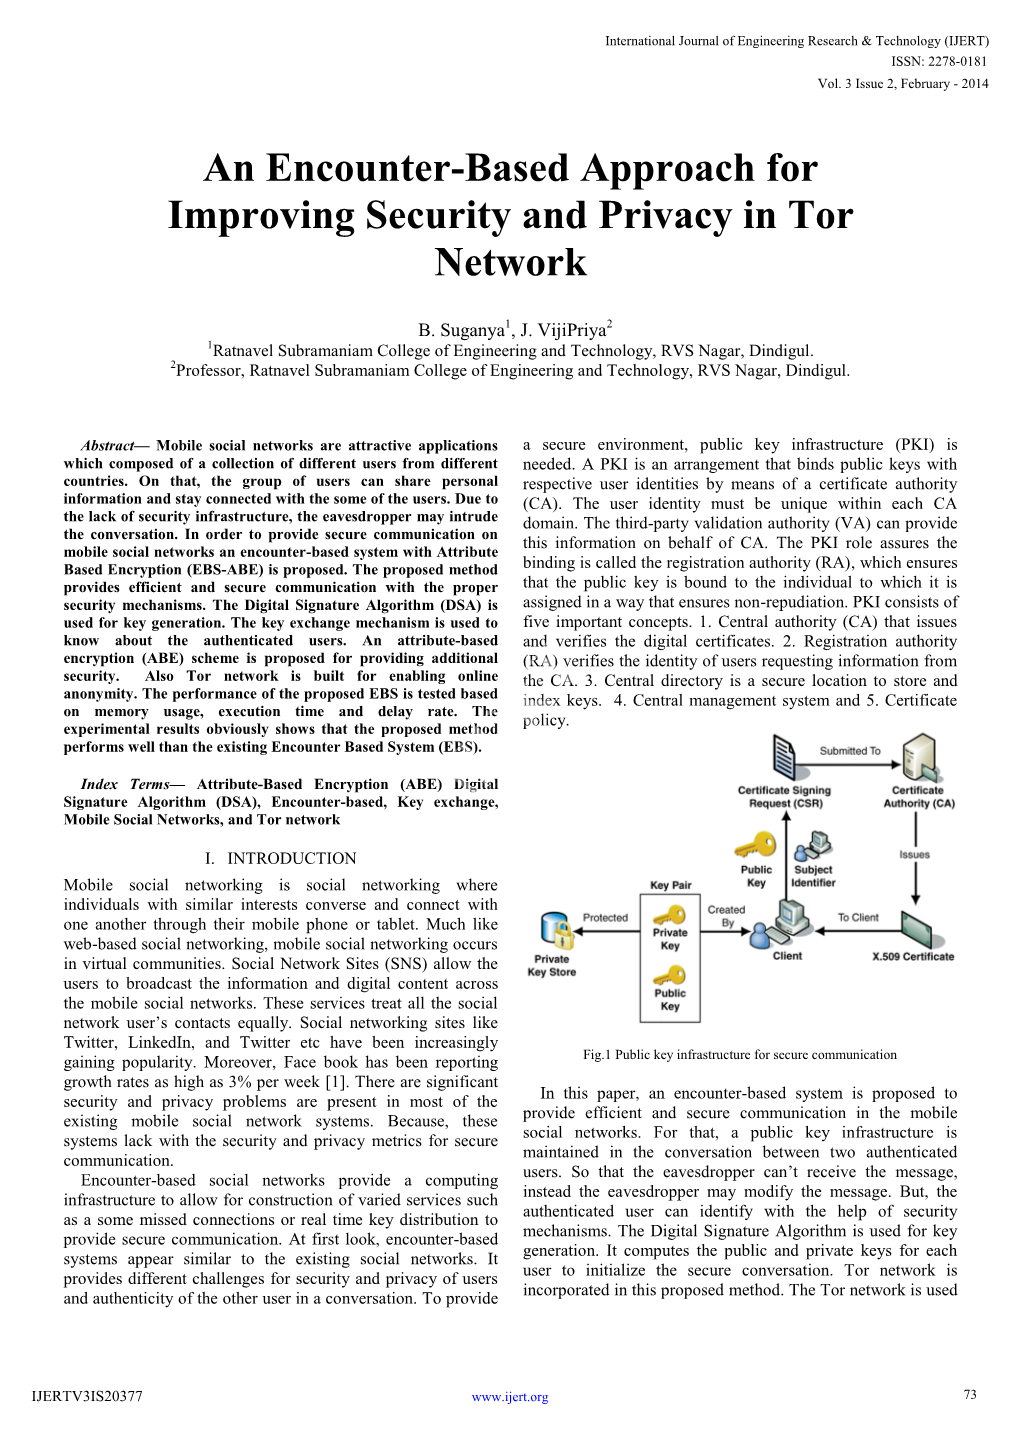 An Encounter-Based Approach for Improving Security and Privacy in Tor Network